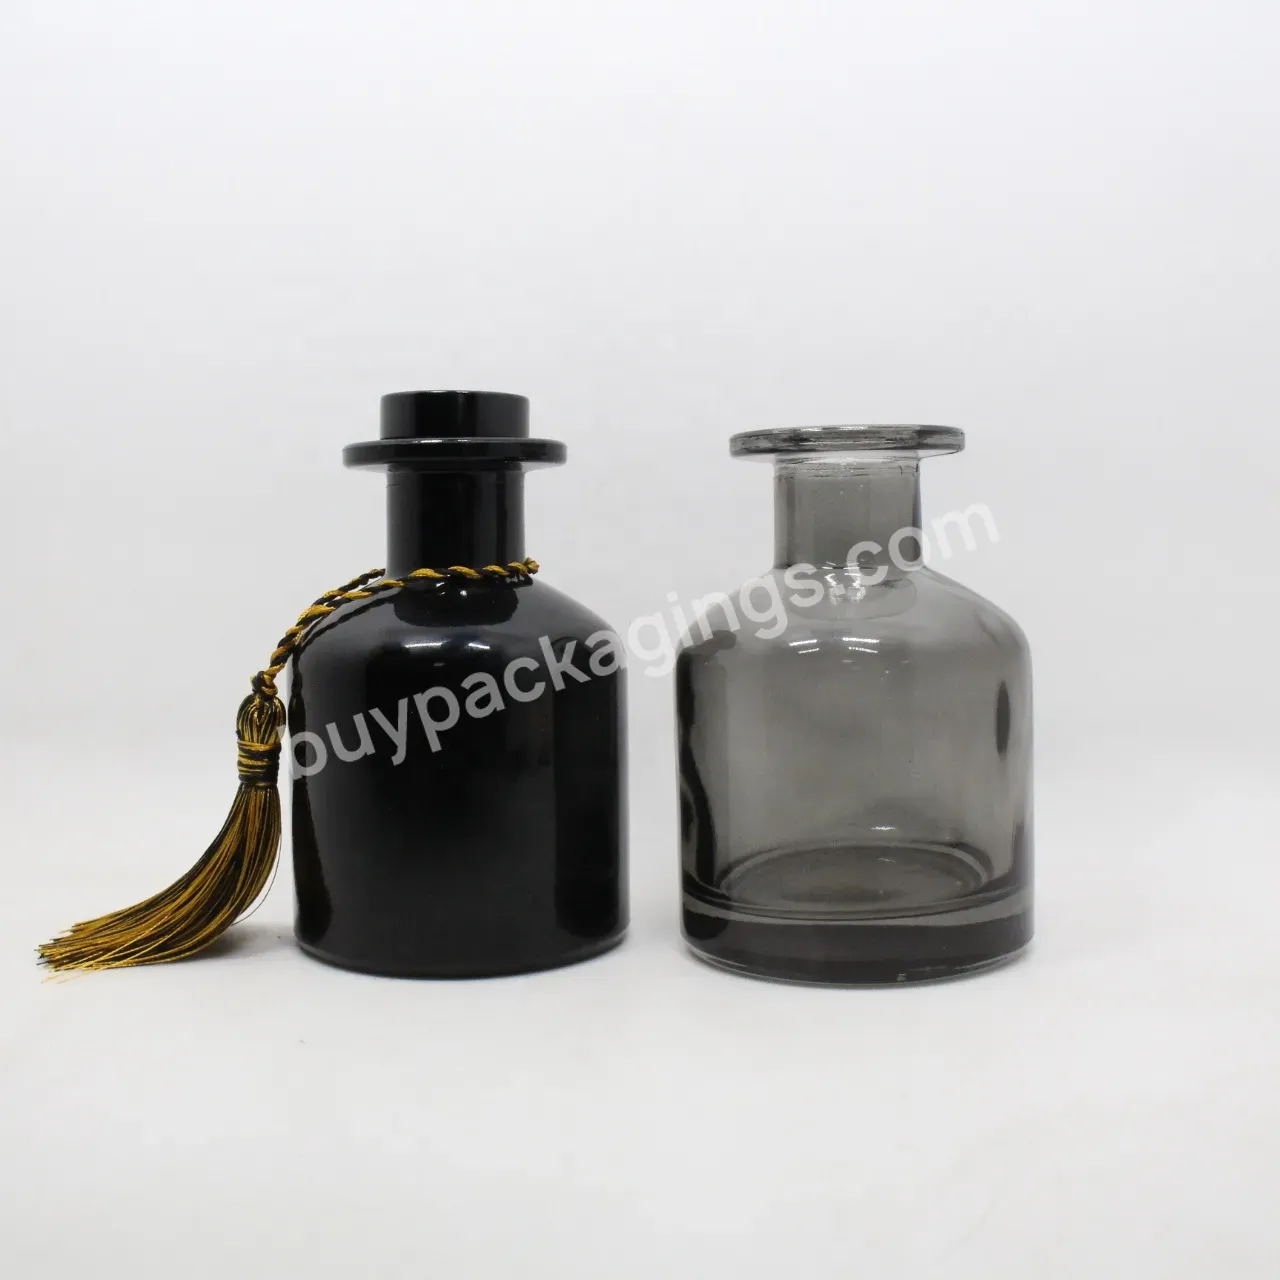 Wholesale 50ml 100ml 150ml 200ml Glass Reed Diffuser Bottle With Gold Cap Luxury Empty Glass Stick Bottle For Aroma Oil Diffuser - Buy Glass Empty Mini 150ml 300ml Aromatherapy Oil Reed Diffuser Bottles Set Car Wholesale,Wholesale Home Room Aroma Def